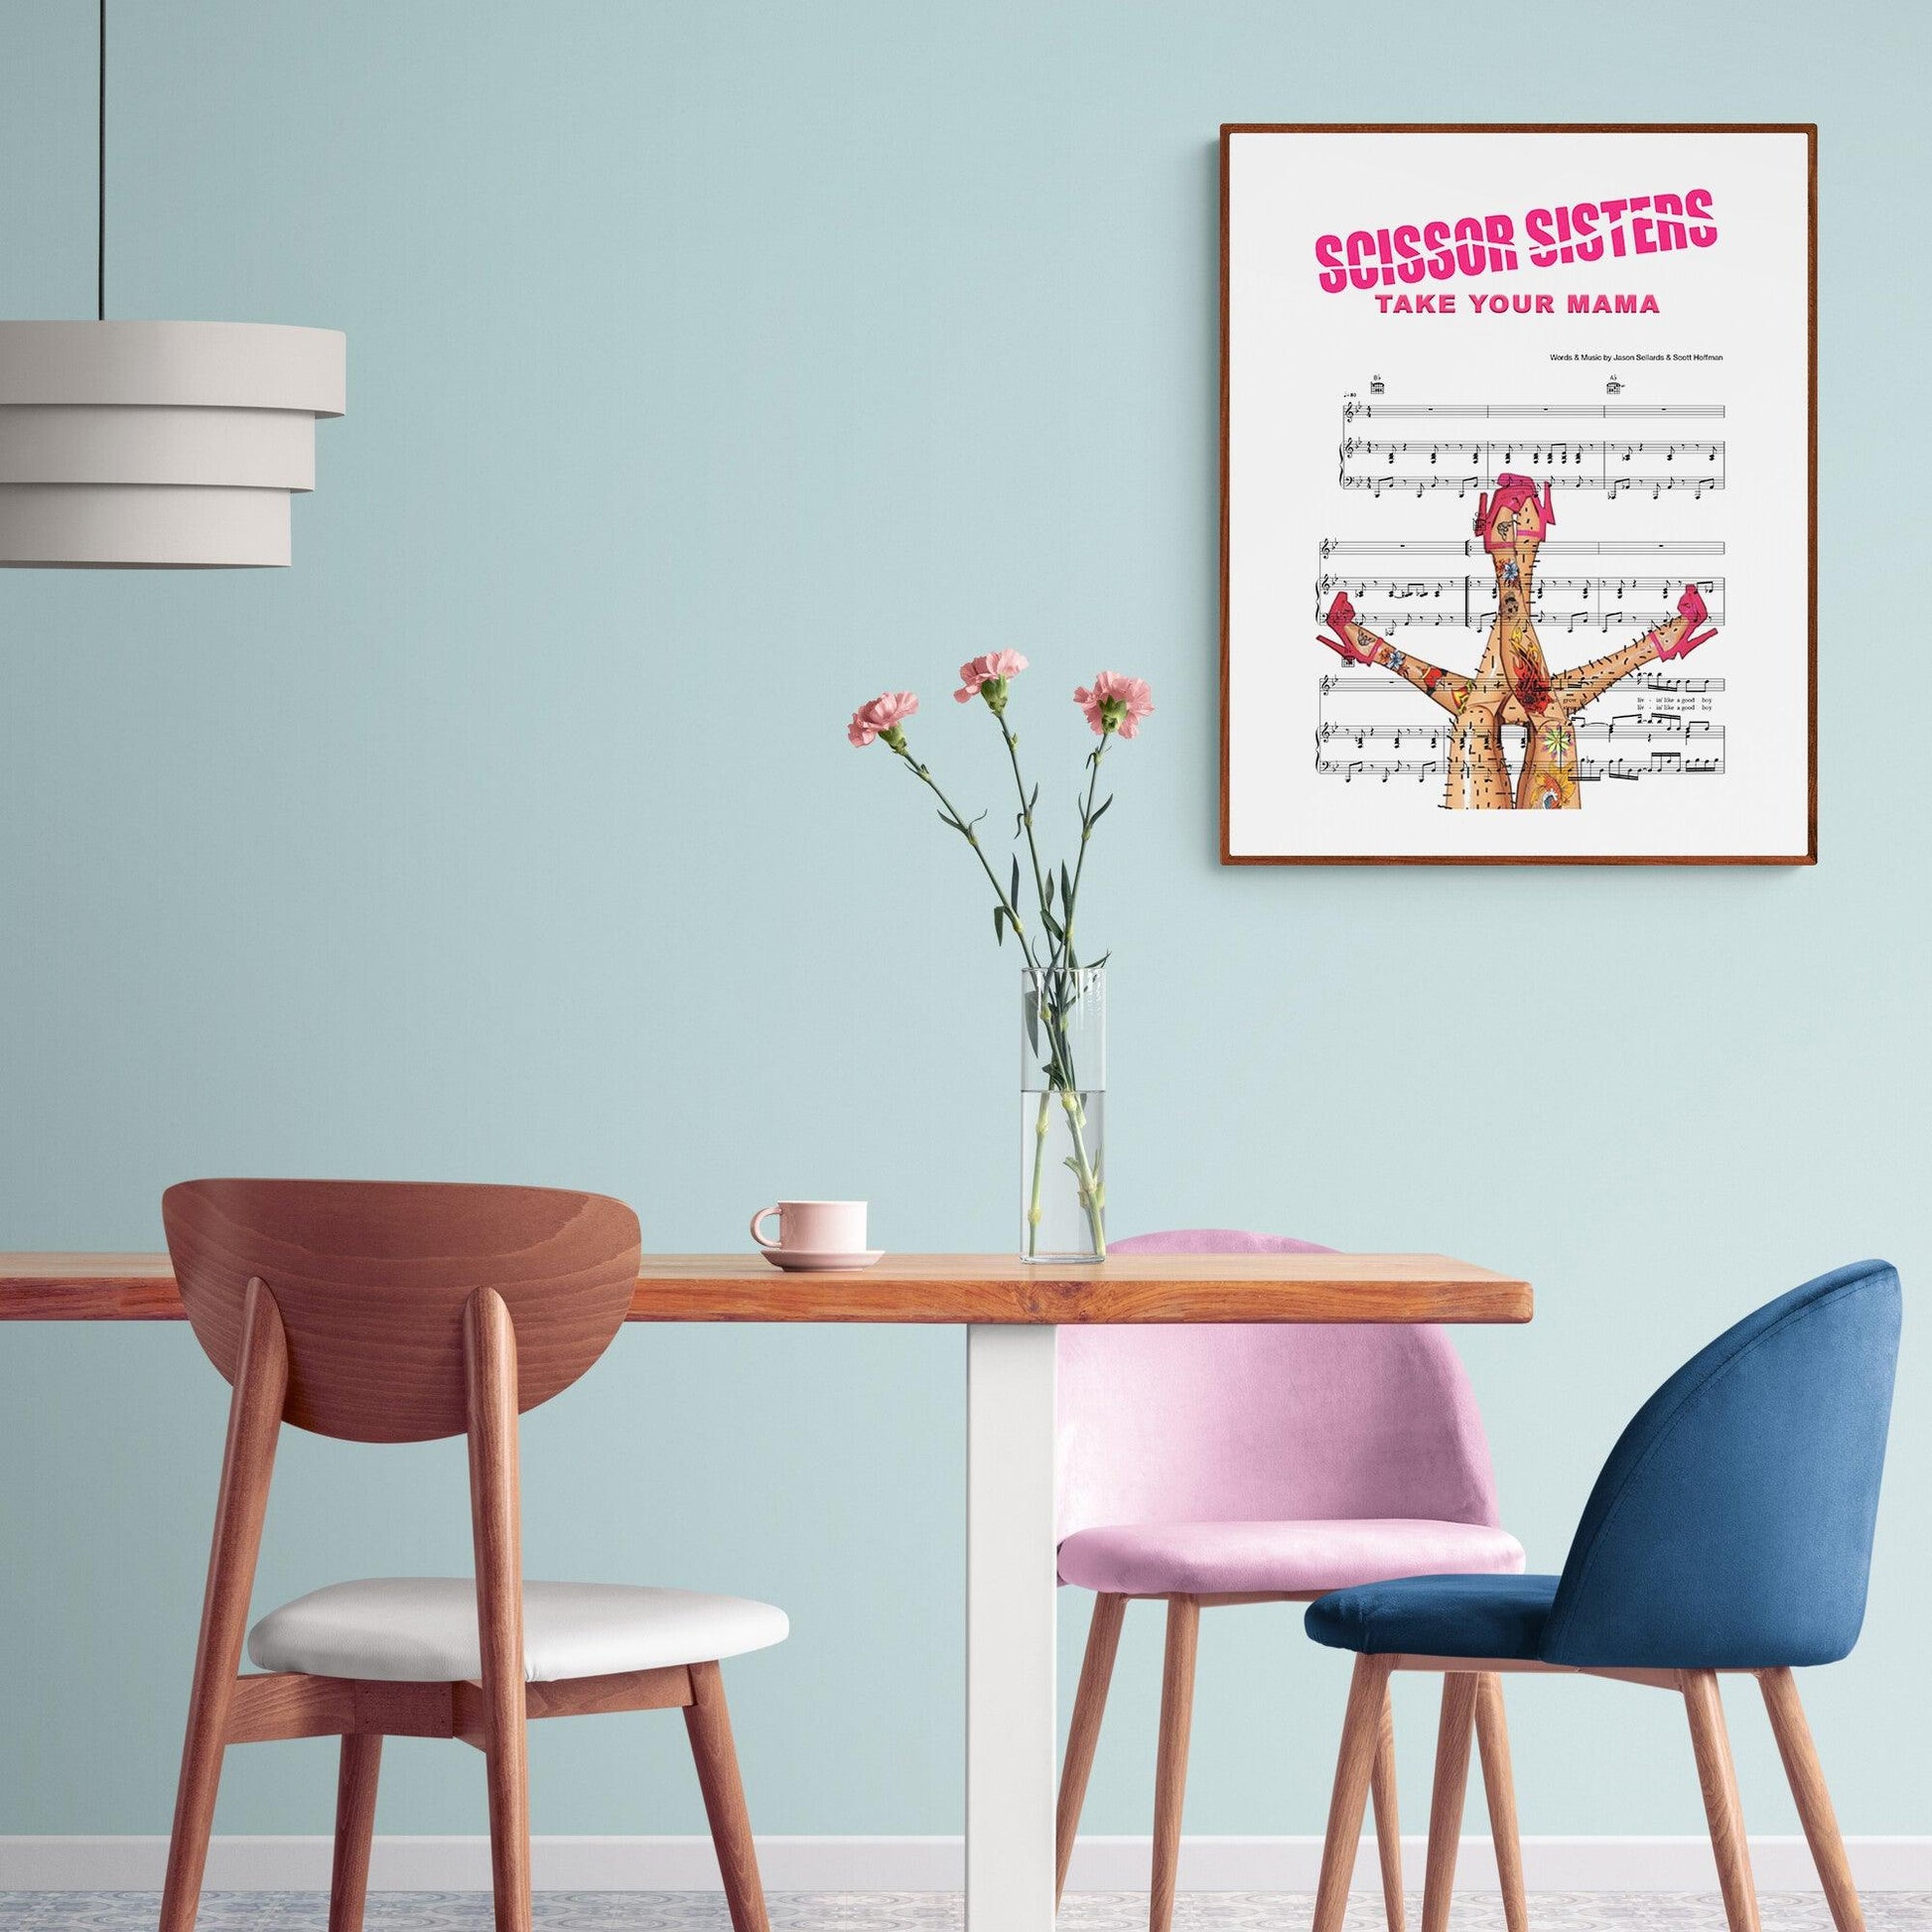 This meticulously designed and painstakingly crafted poster displays the iconic Scissor Sisters lyric "Take Your Mama", producing a captivating visual. The superior quality poster is perfect for conveying your adoration of music and enlivening your walls. Instill a unique element to your home decor immediately.